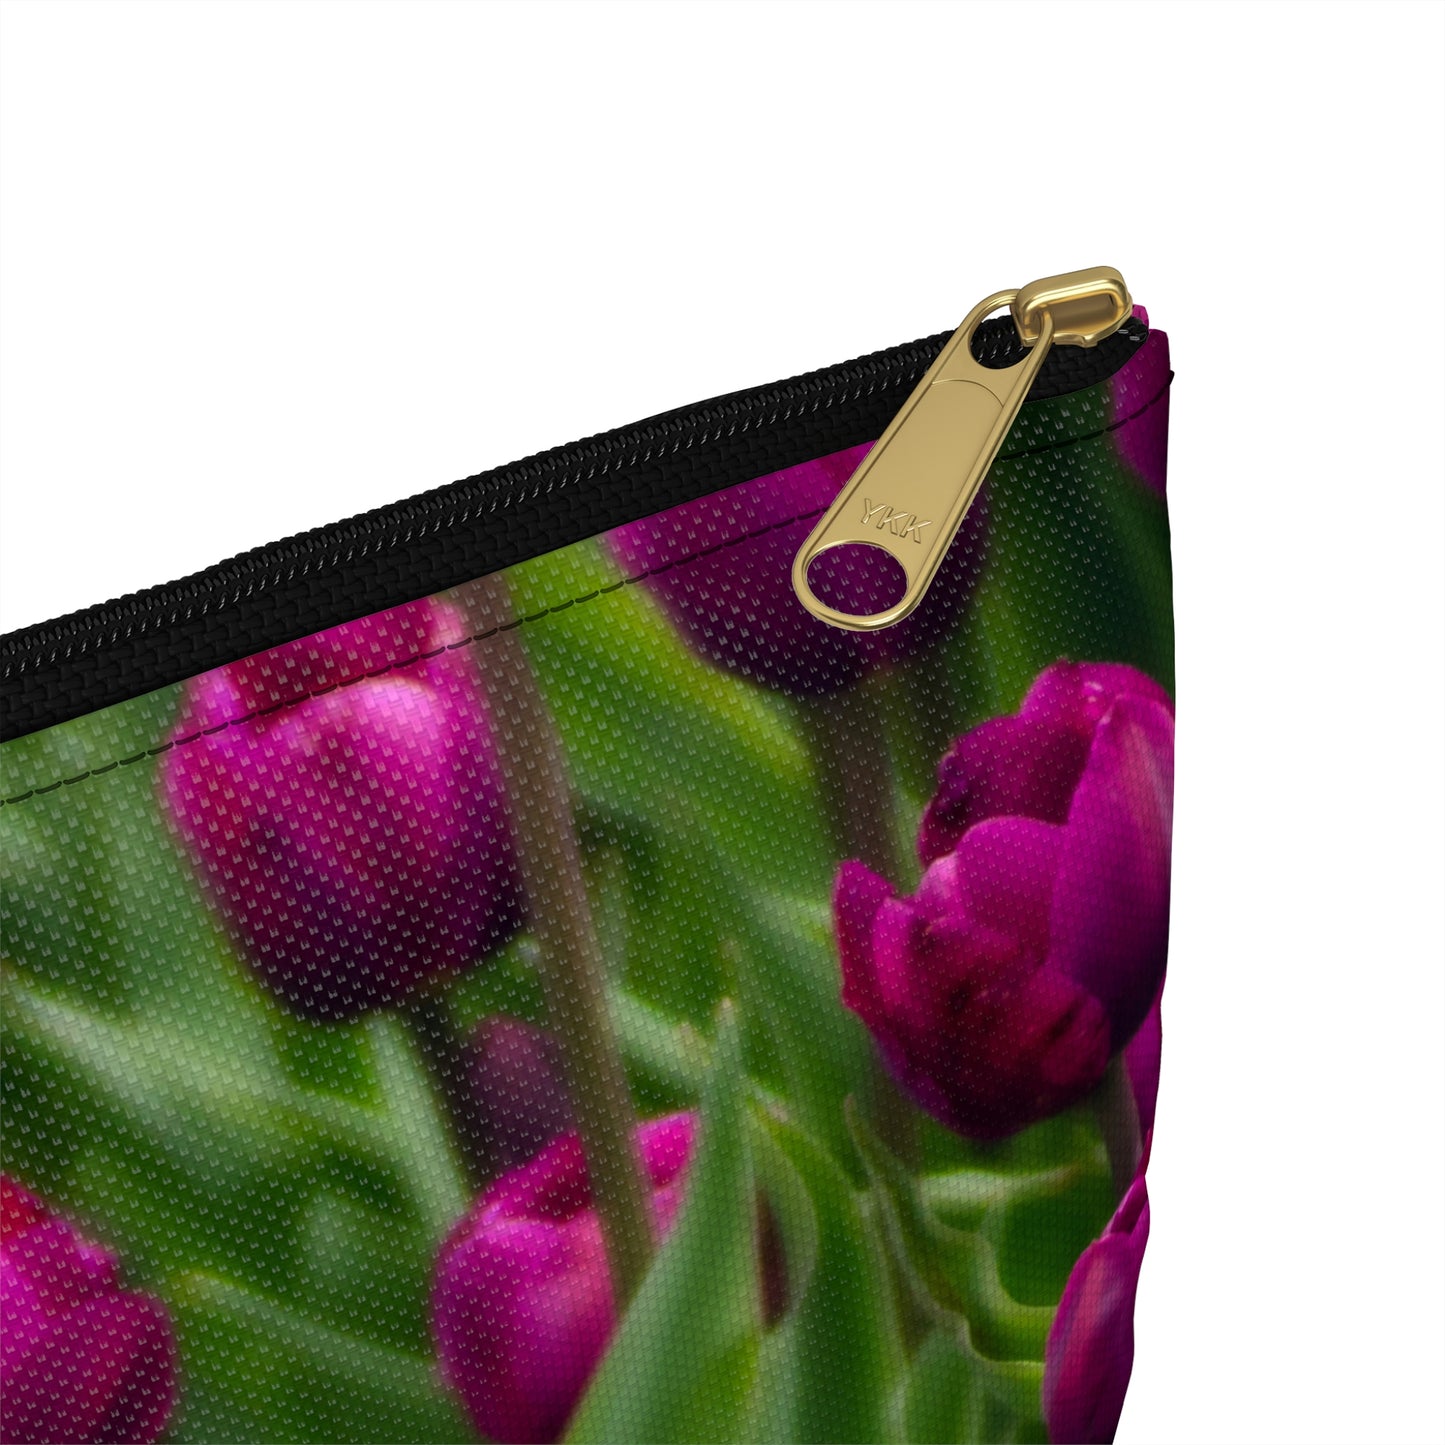 Flowers 19 Accessory Pouch